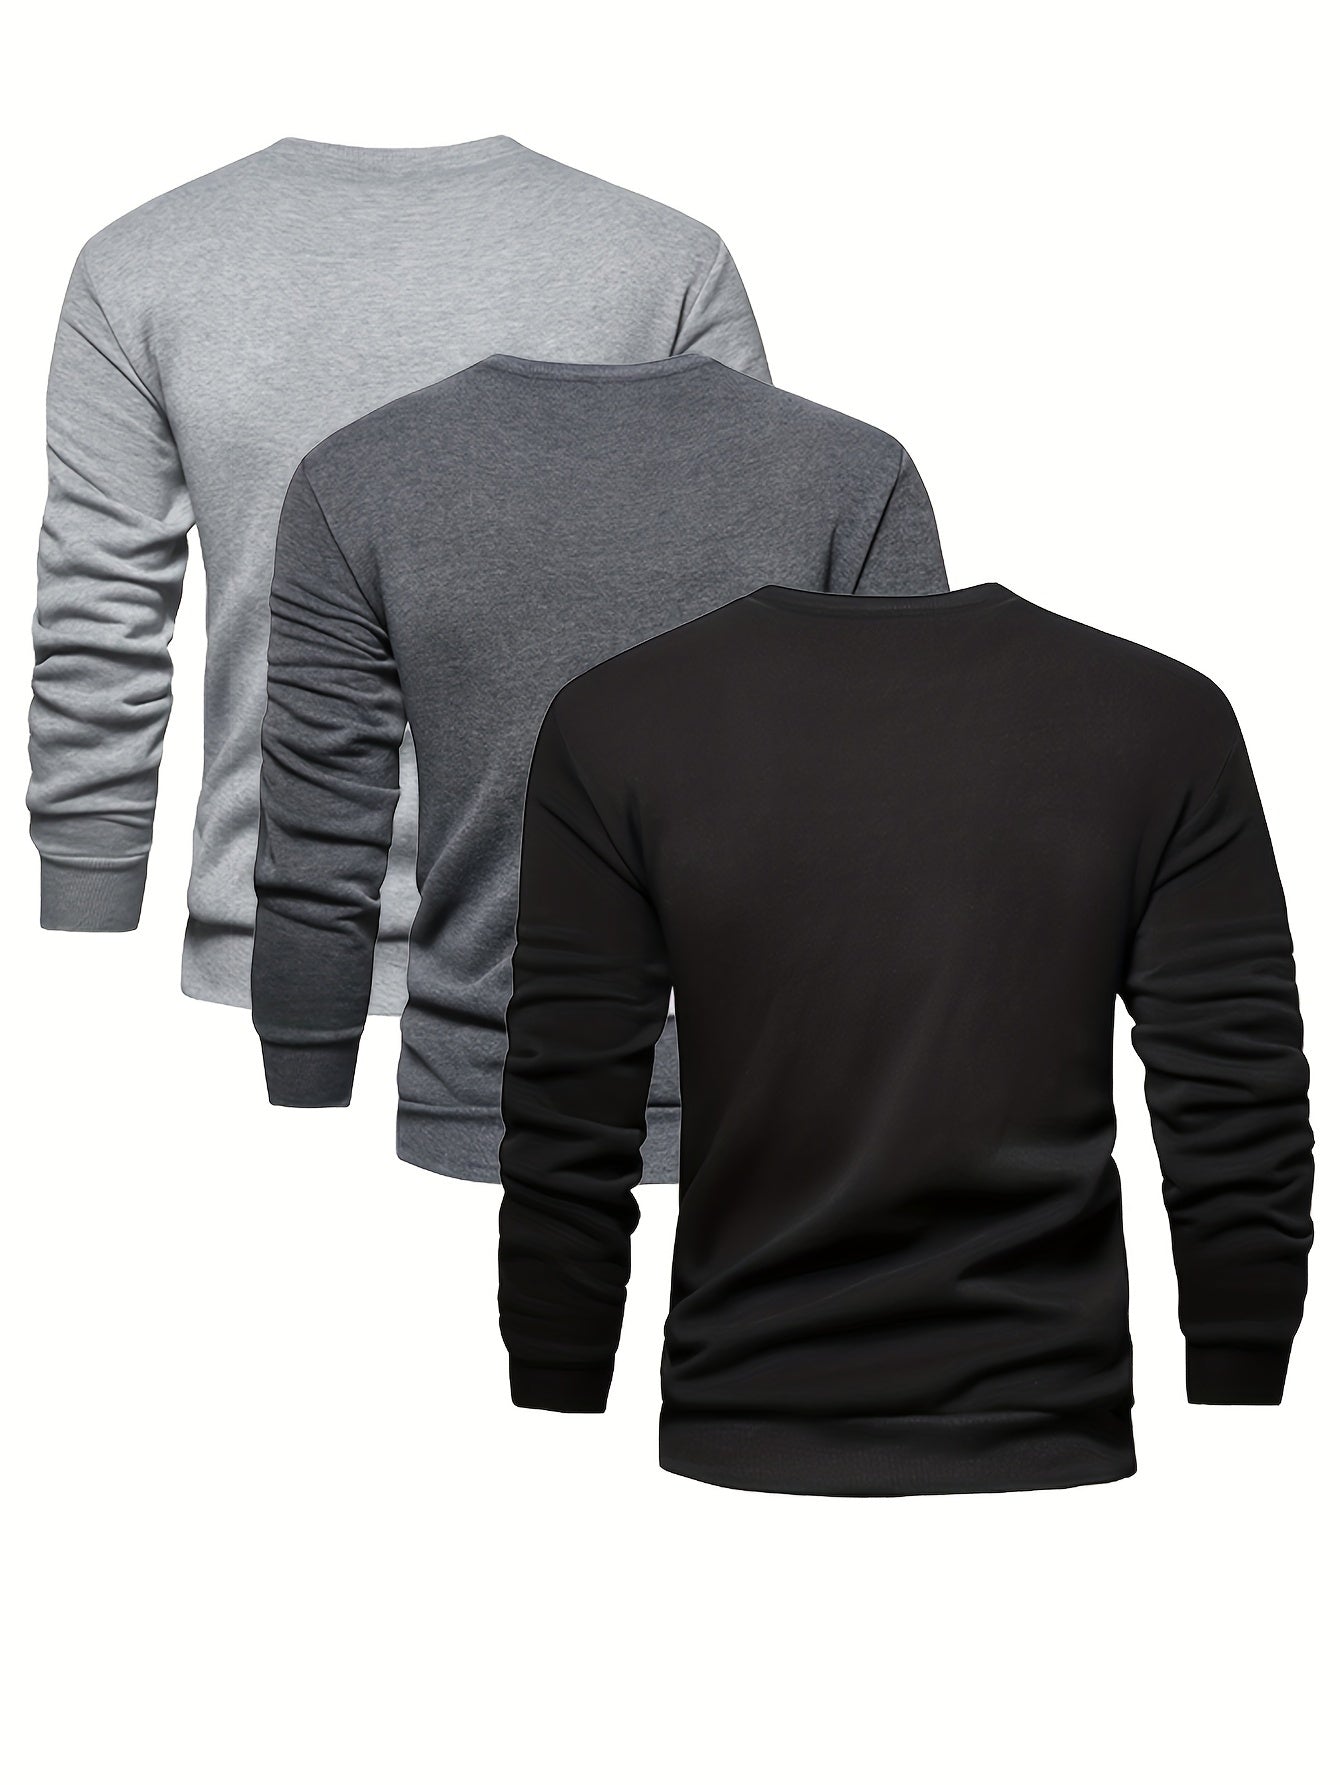 3pcs Men's Autumn And Winter Thickened Warm Skin-friendly Soft Sweater, Skinny Long Sleeve Crew Neck Warm Undershirts Tops